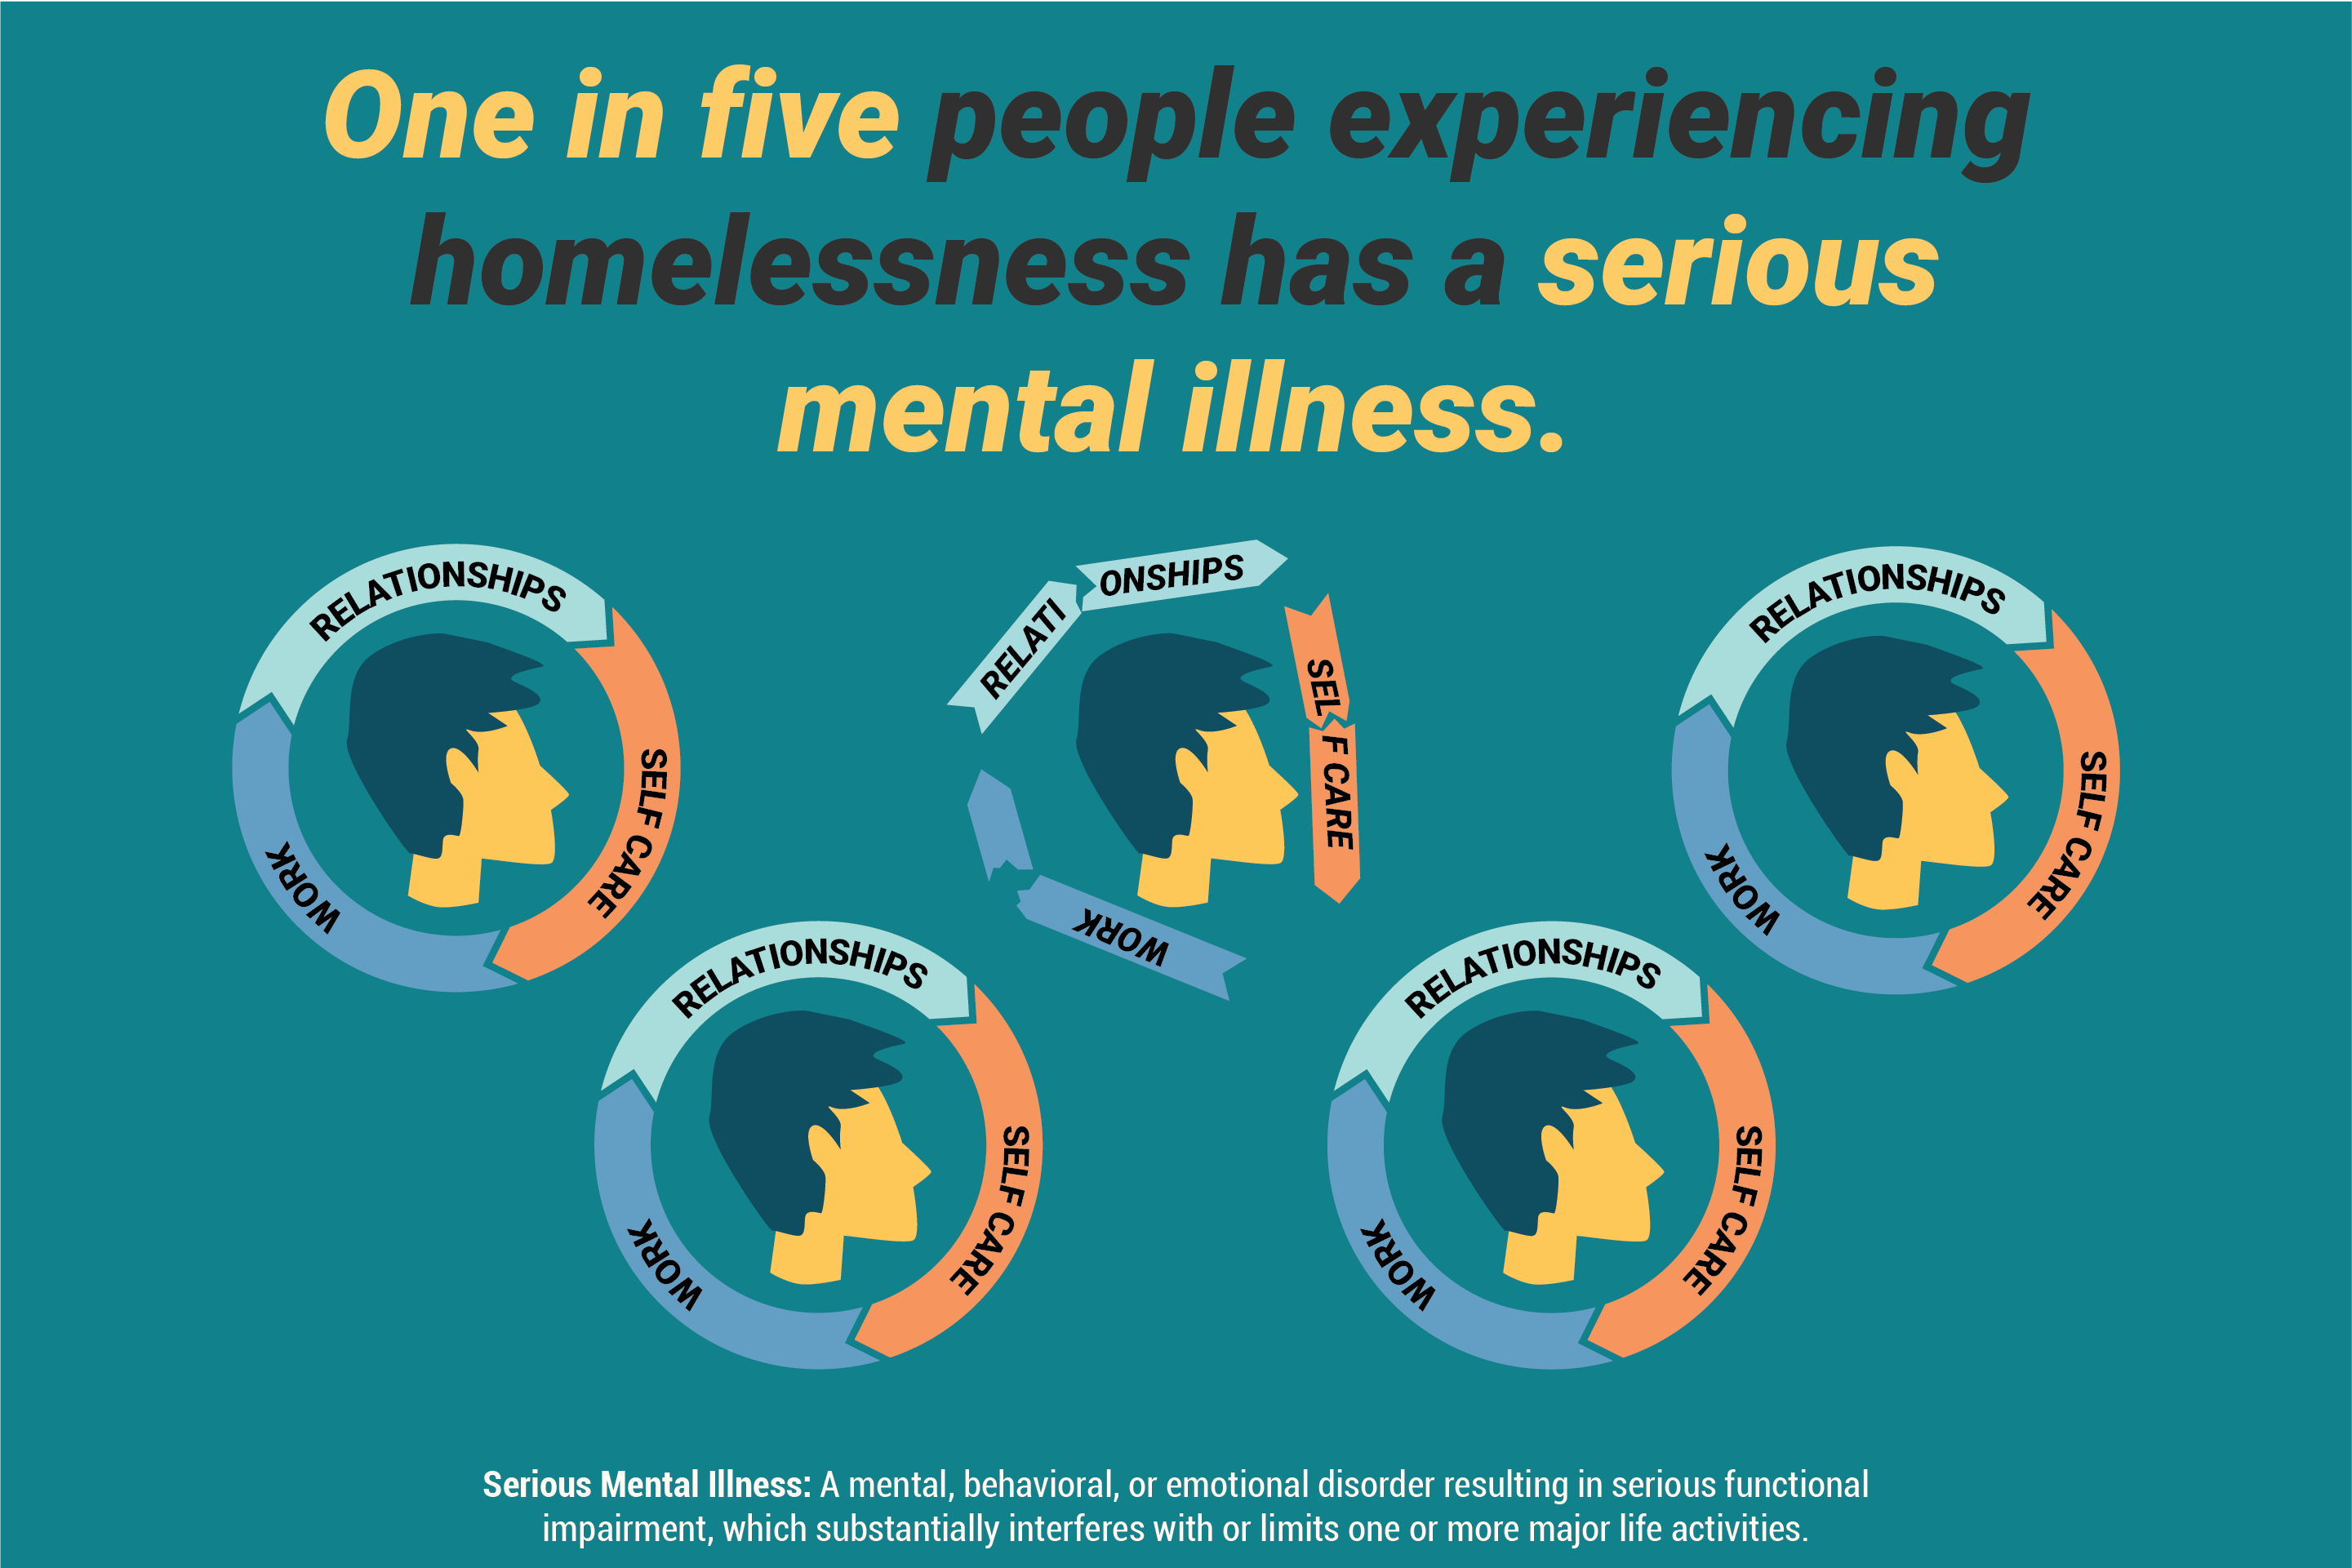 One in five people experiencing homelessness has a serious mental illness.